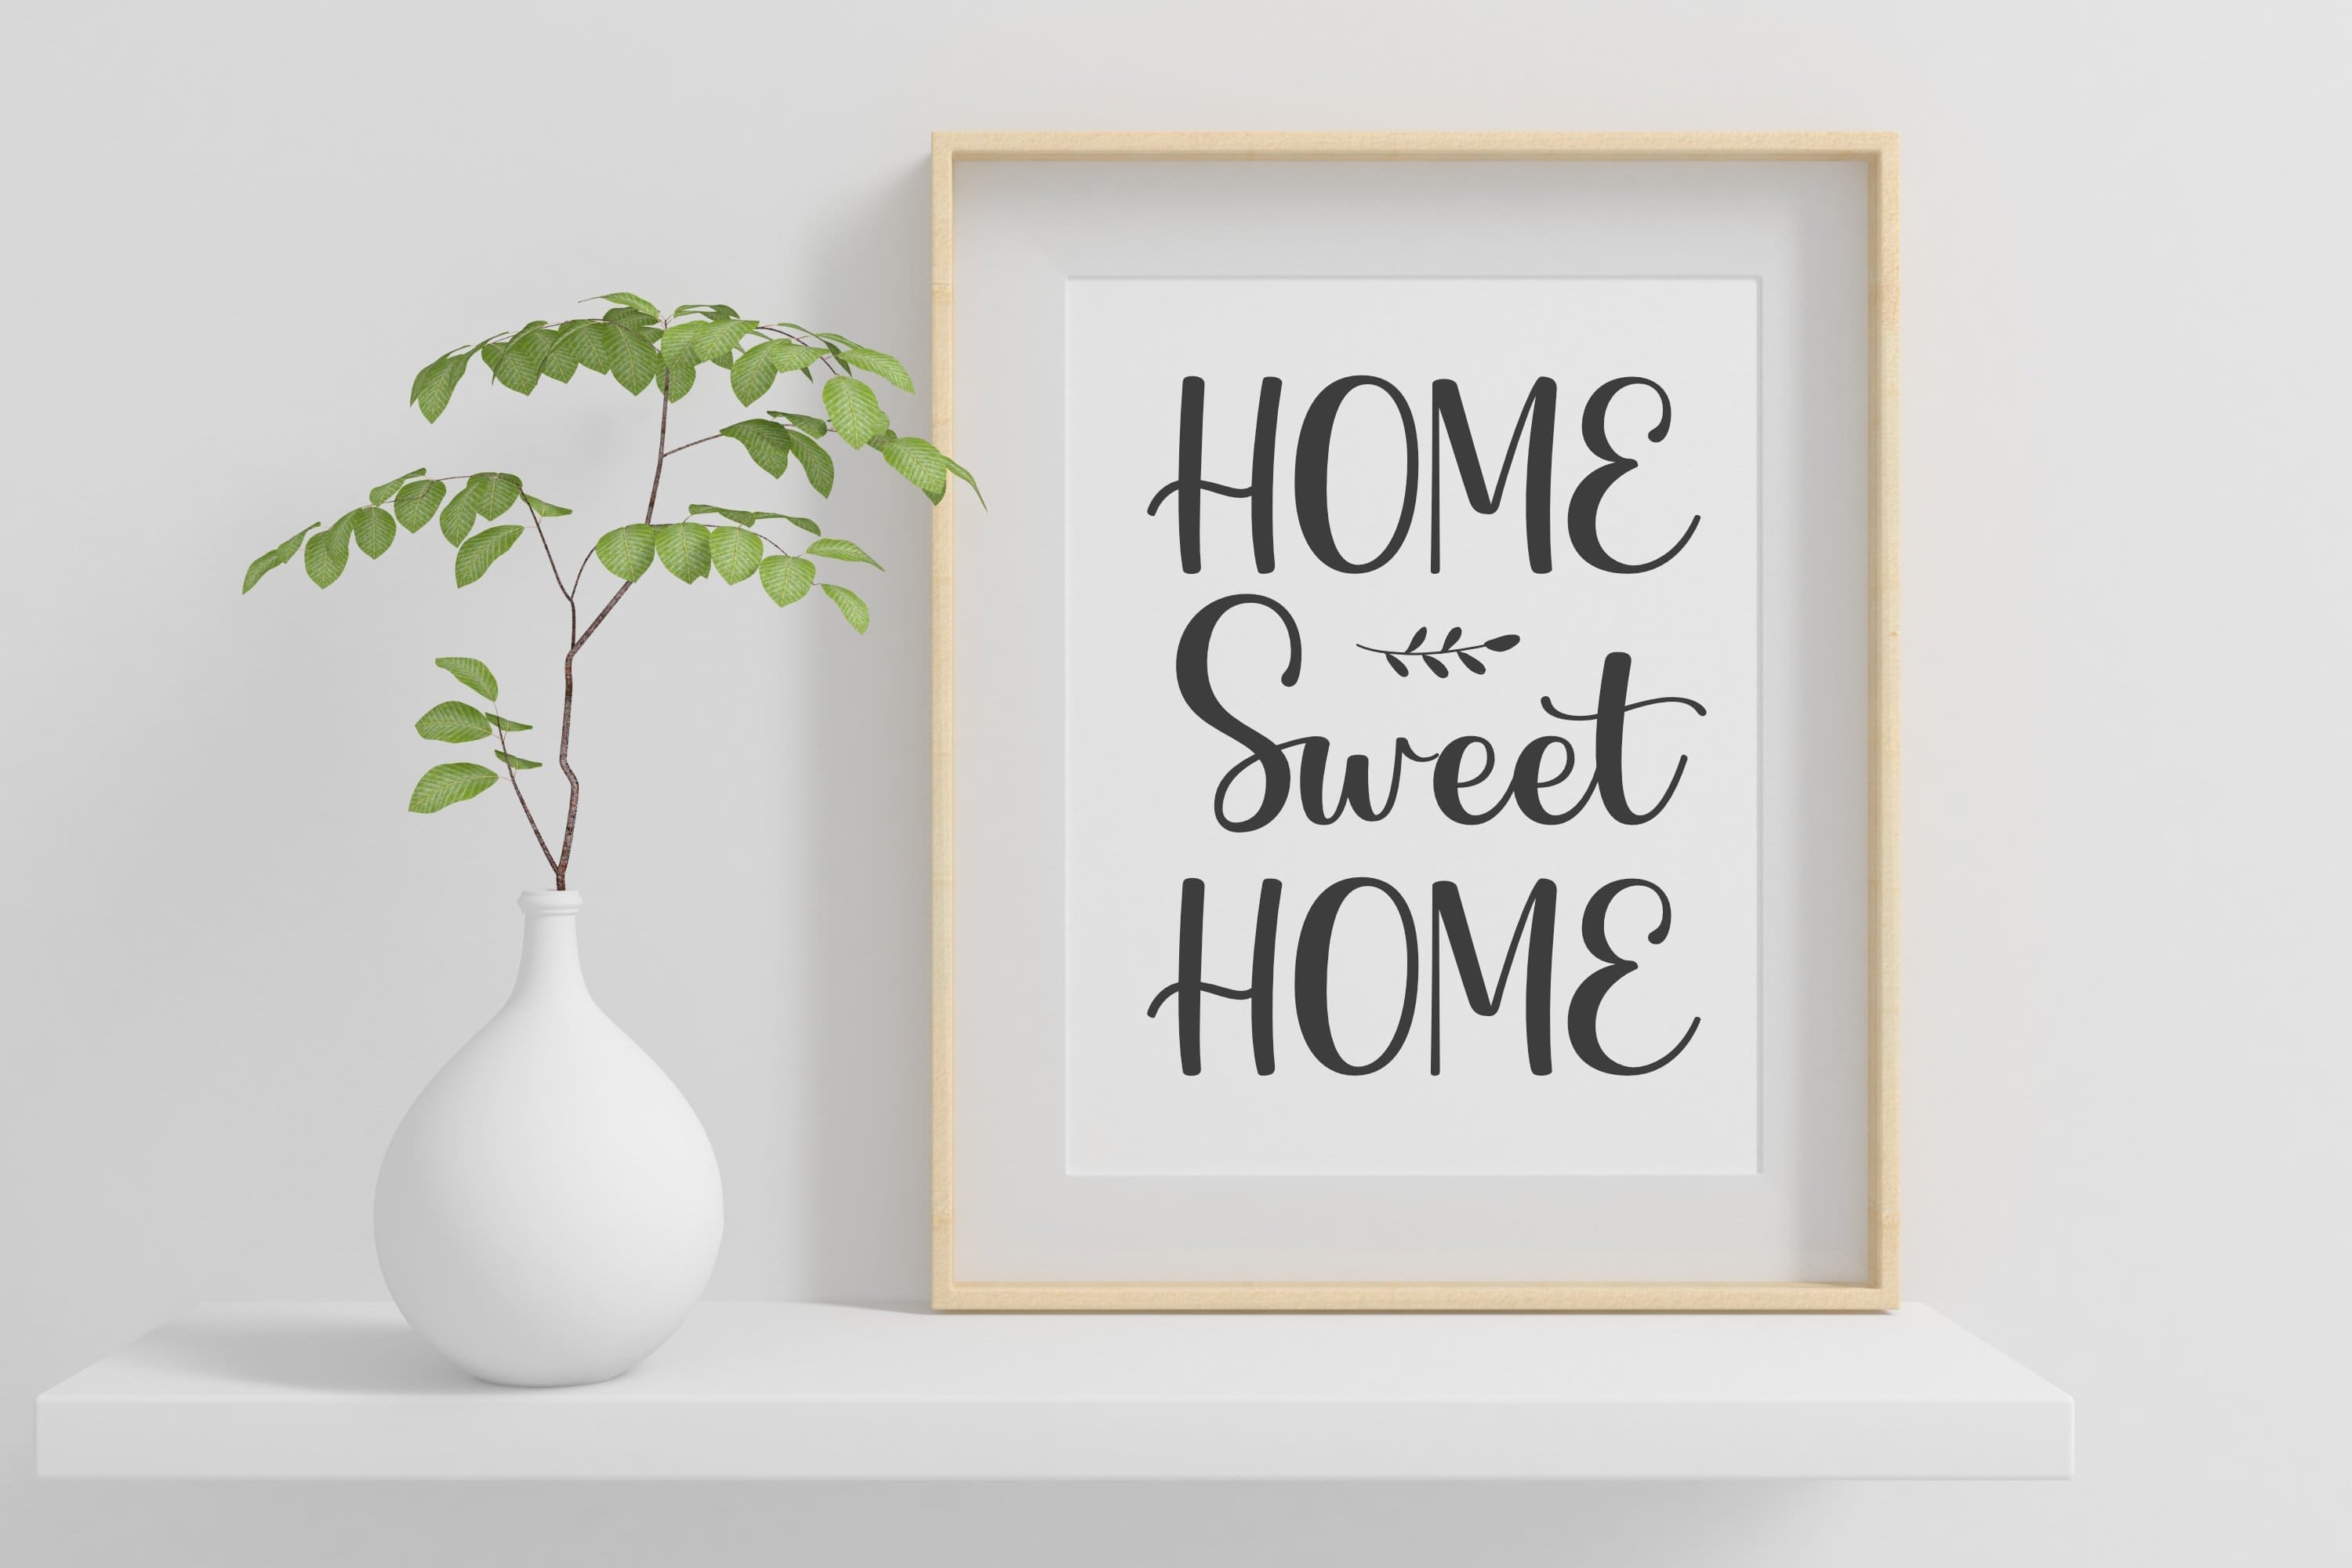 The inscription on a white background in a beige frame: Home Sweet Home.